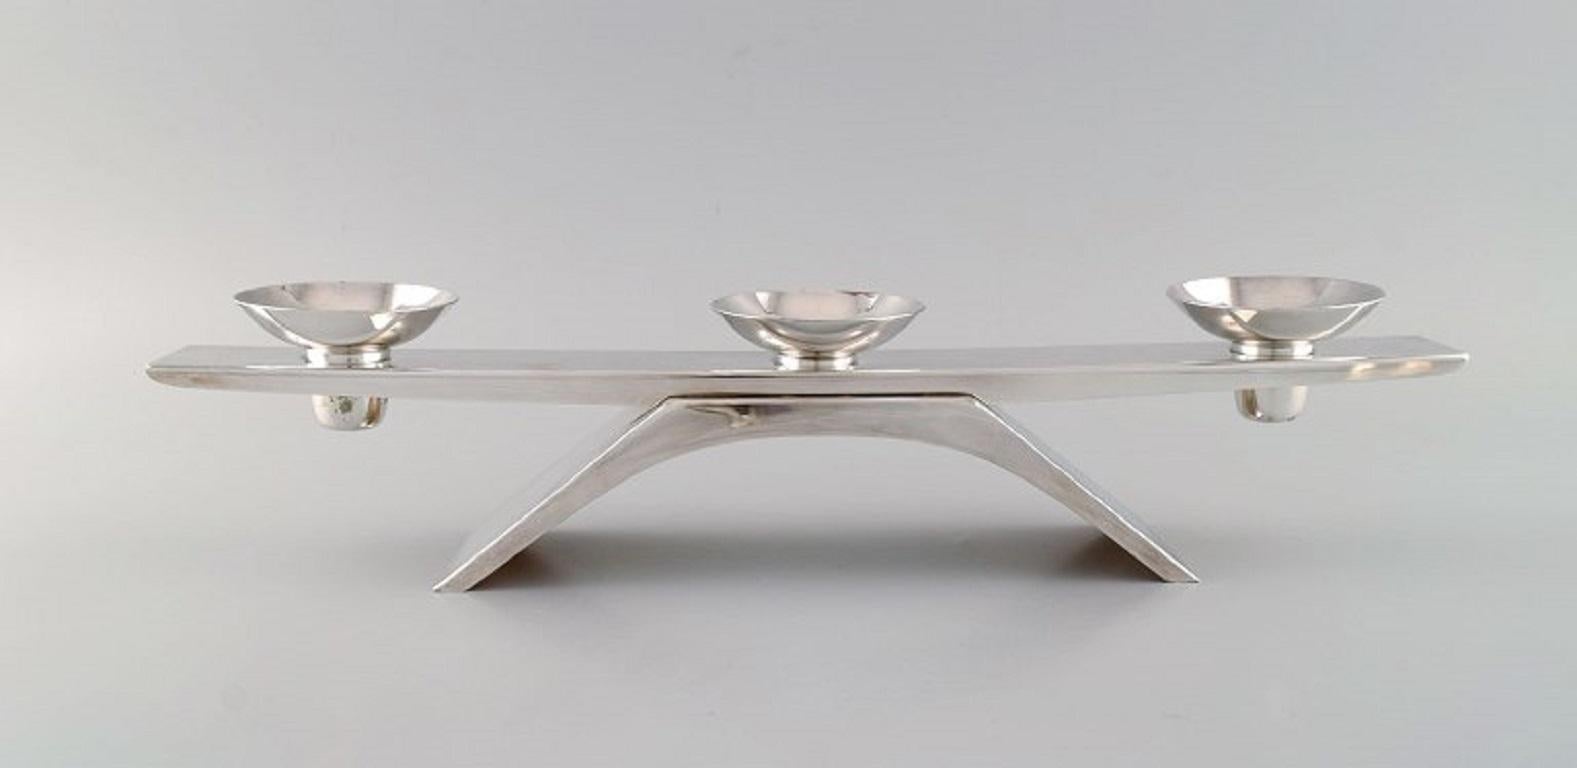 WMF, Germany. Modernist Ikora candleholder in plated silver. 
Mid-20th century.
Measures: 41.5 x 6.5 cm.
Height: 9 cm.
In excellent condition.
Stamped.